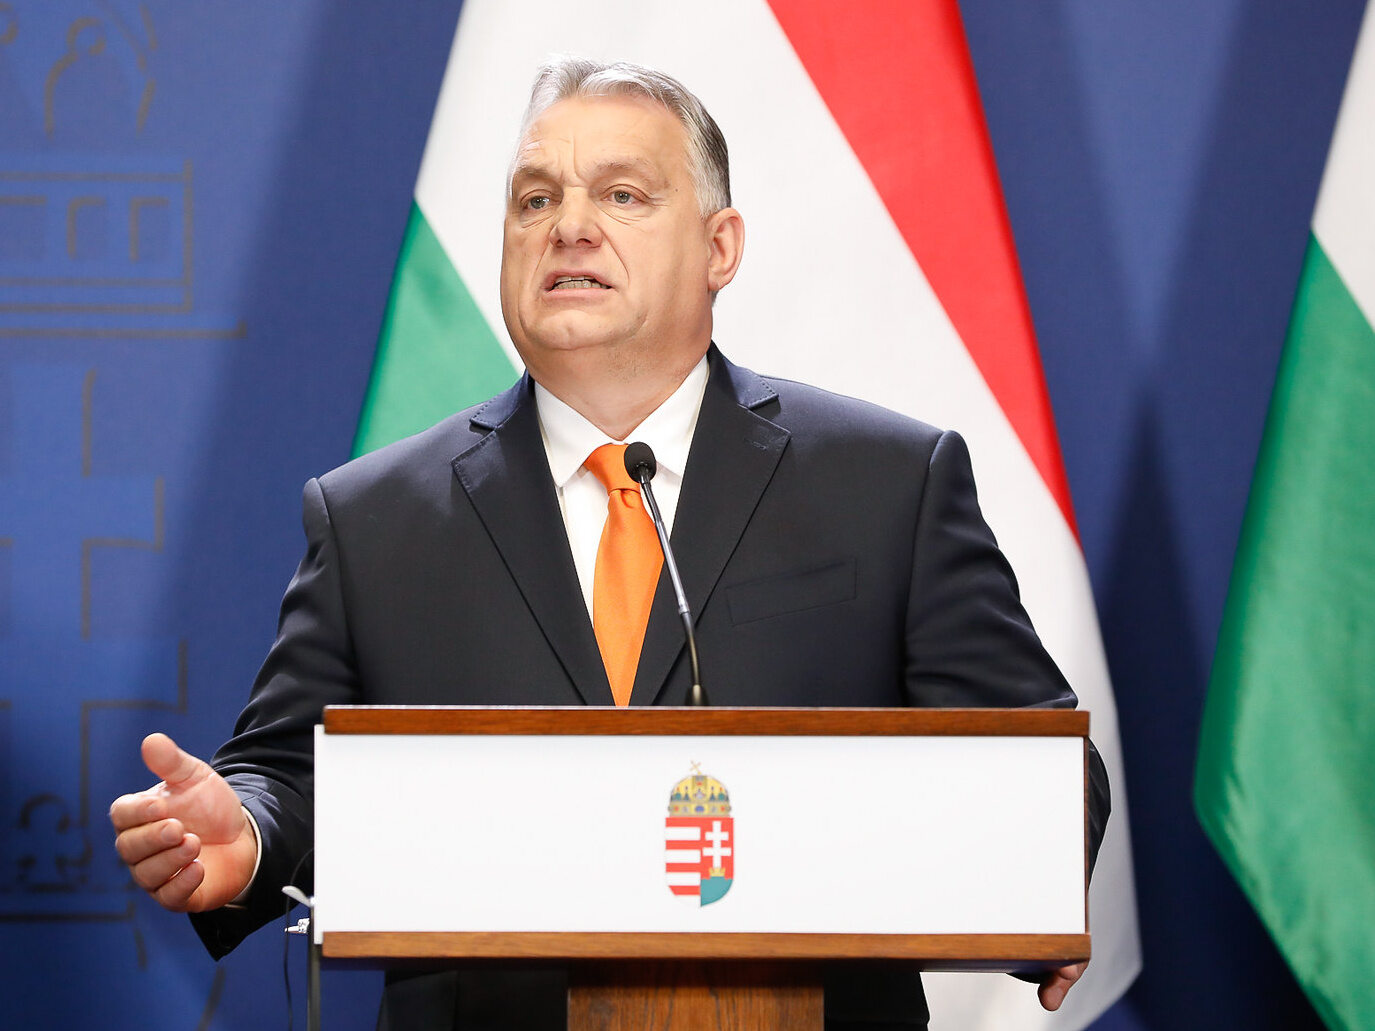 Hungary did not allow the EU to help Ukraine.  It's about EUR 50 billion